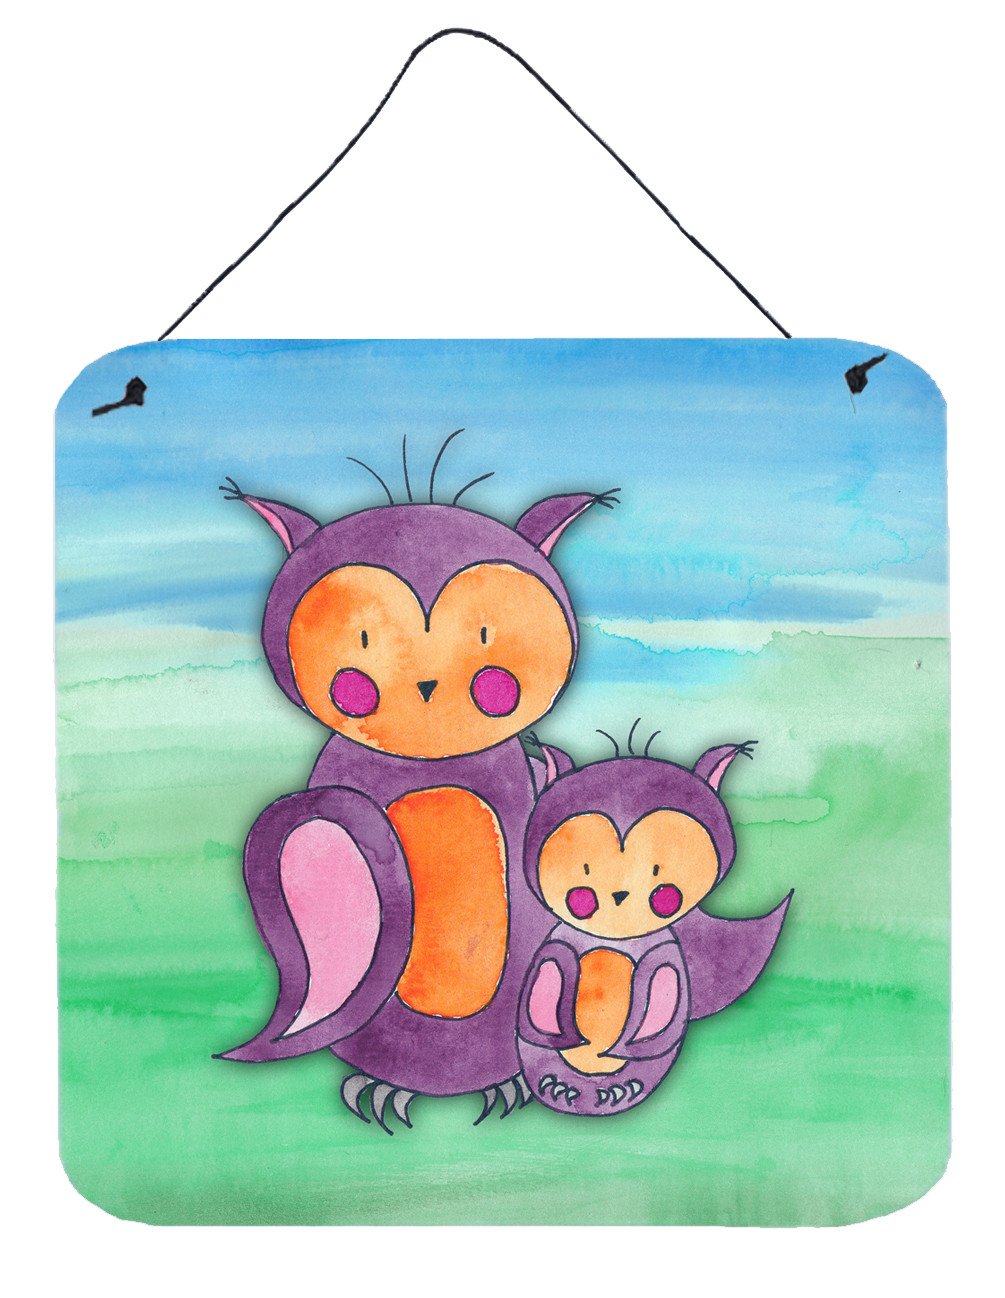 Momma and Baby Owl Watercolor Wall or Door Hanging Prints BB7430DS66 by Caroline's Treasures